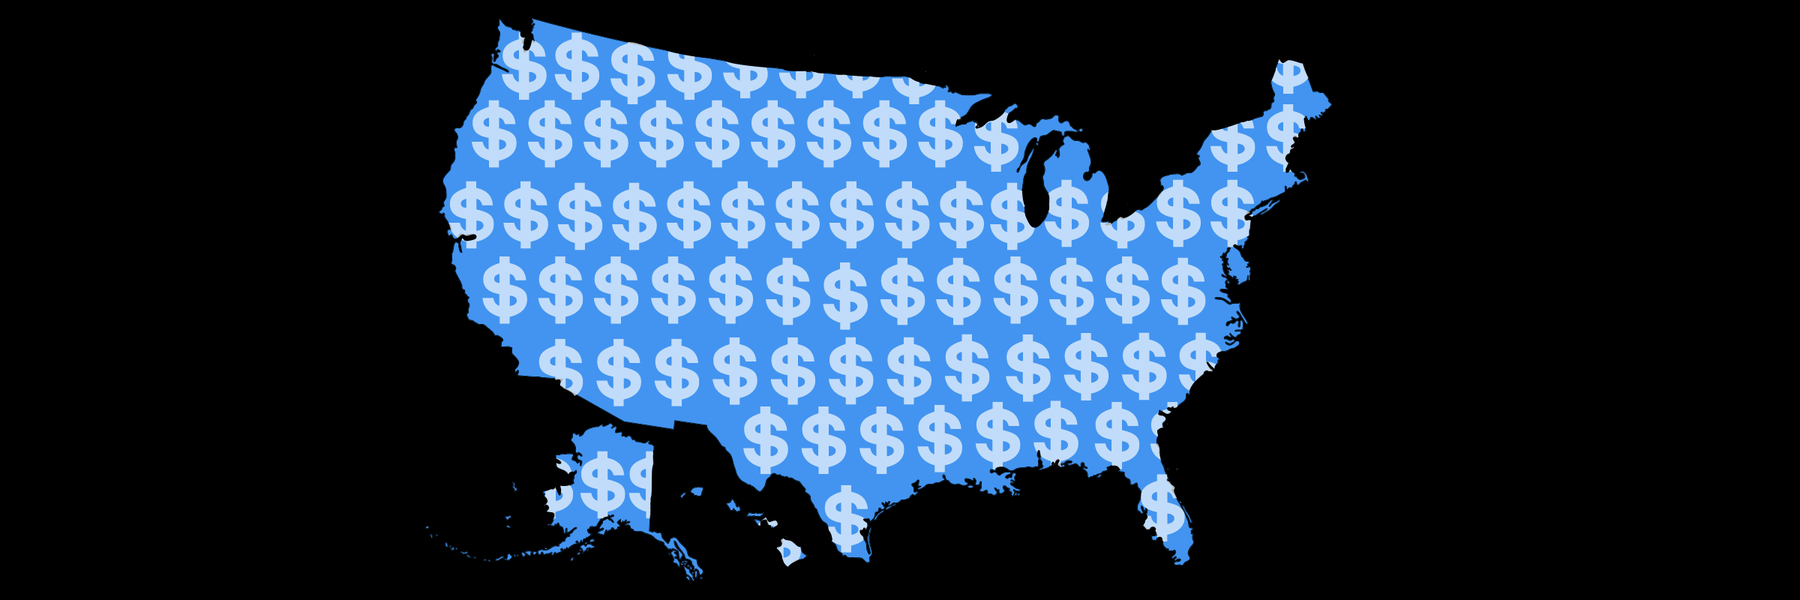 Map of the United States with dollar signs